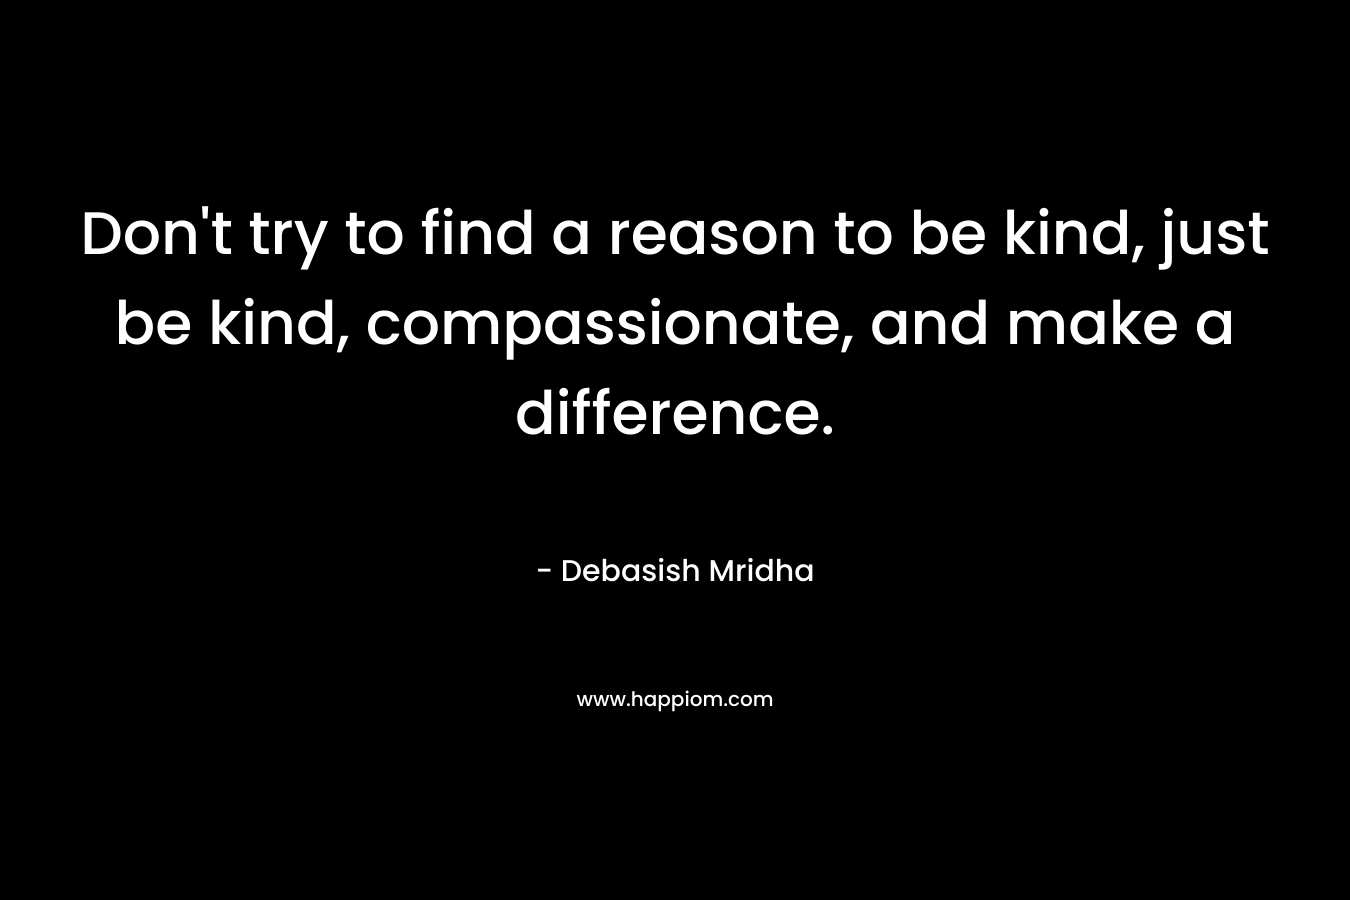 Don't try to find a reason to be kind, just be kind, compassionate, and make a difference.